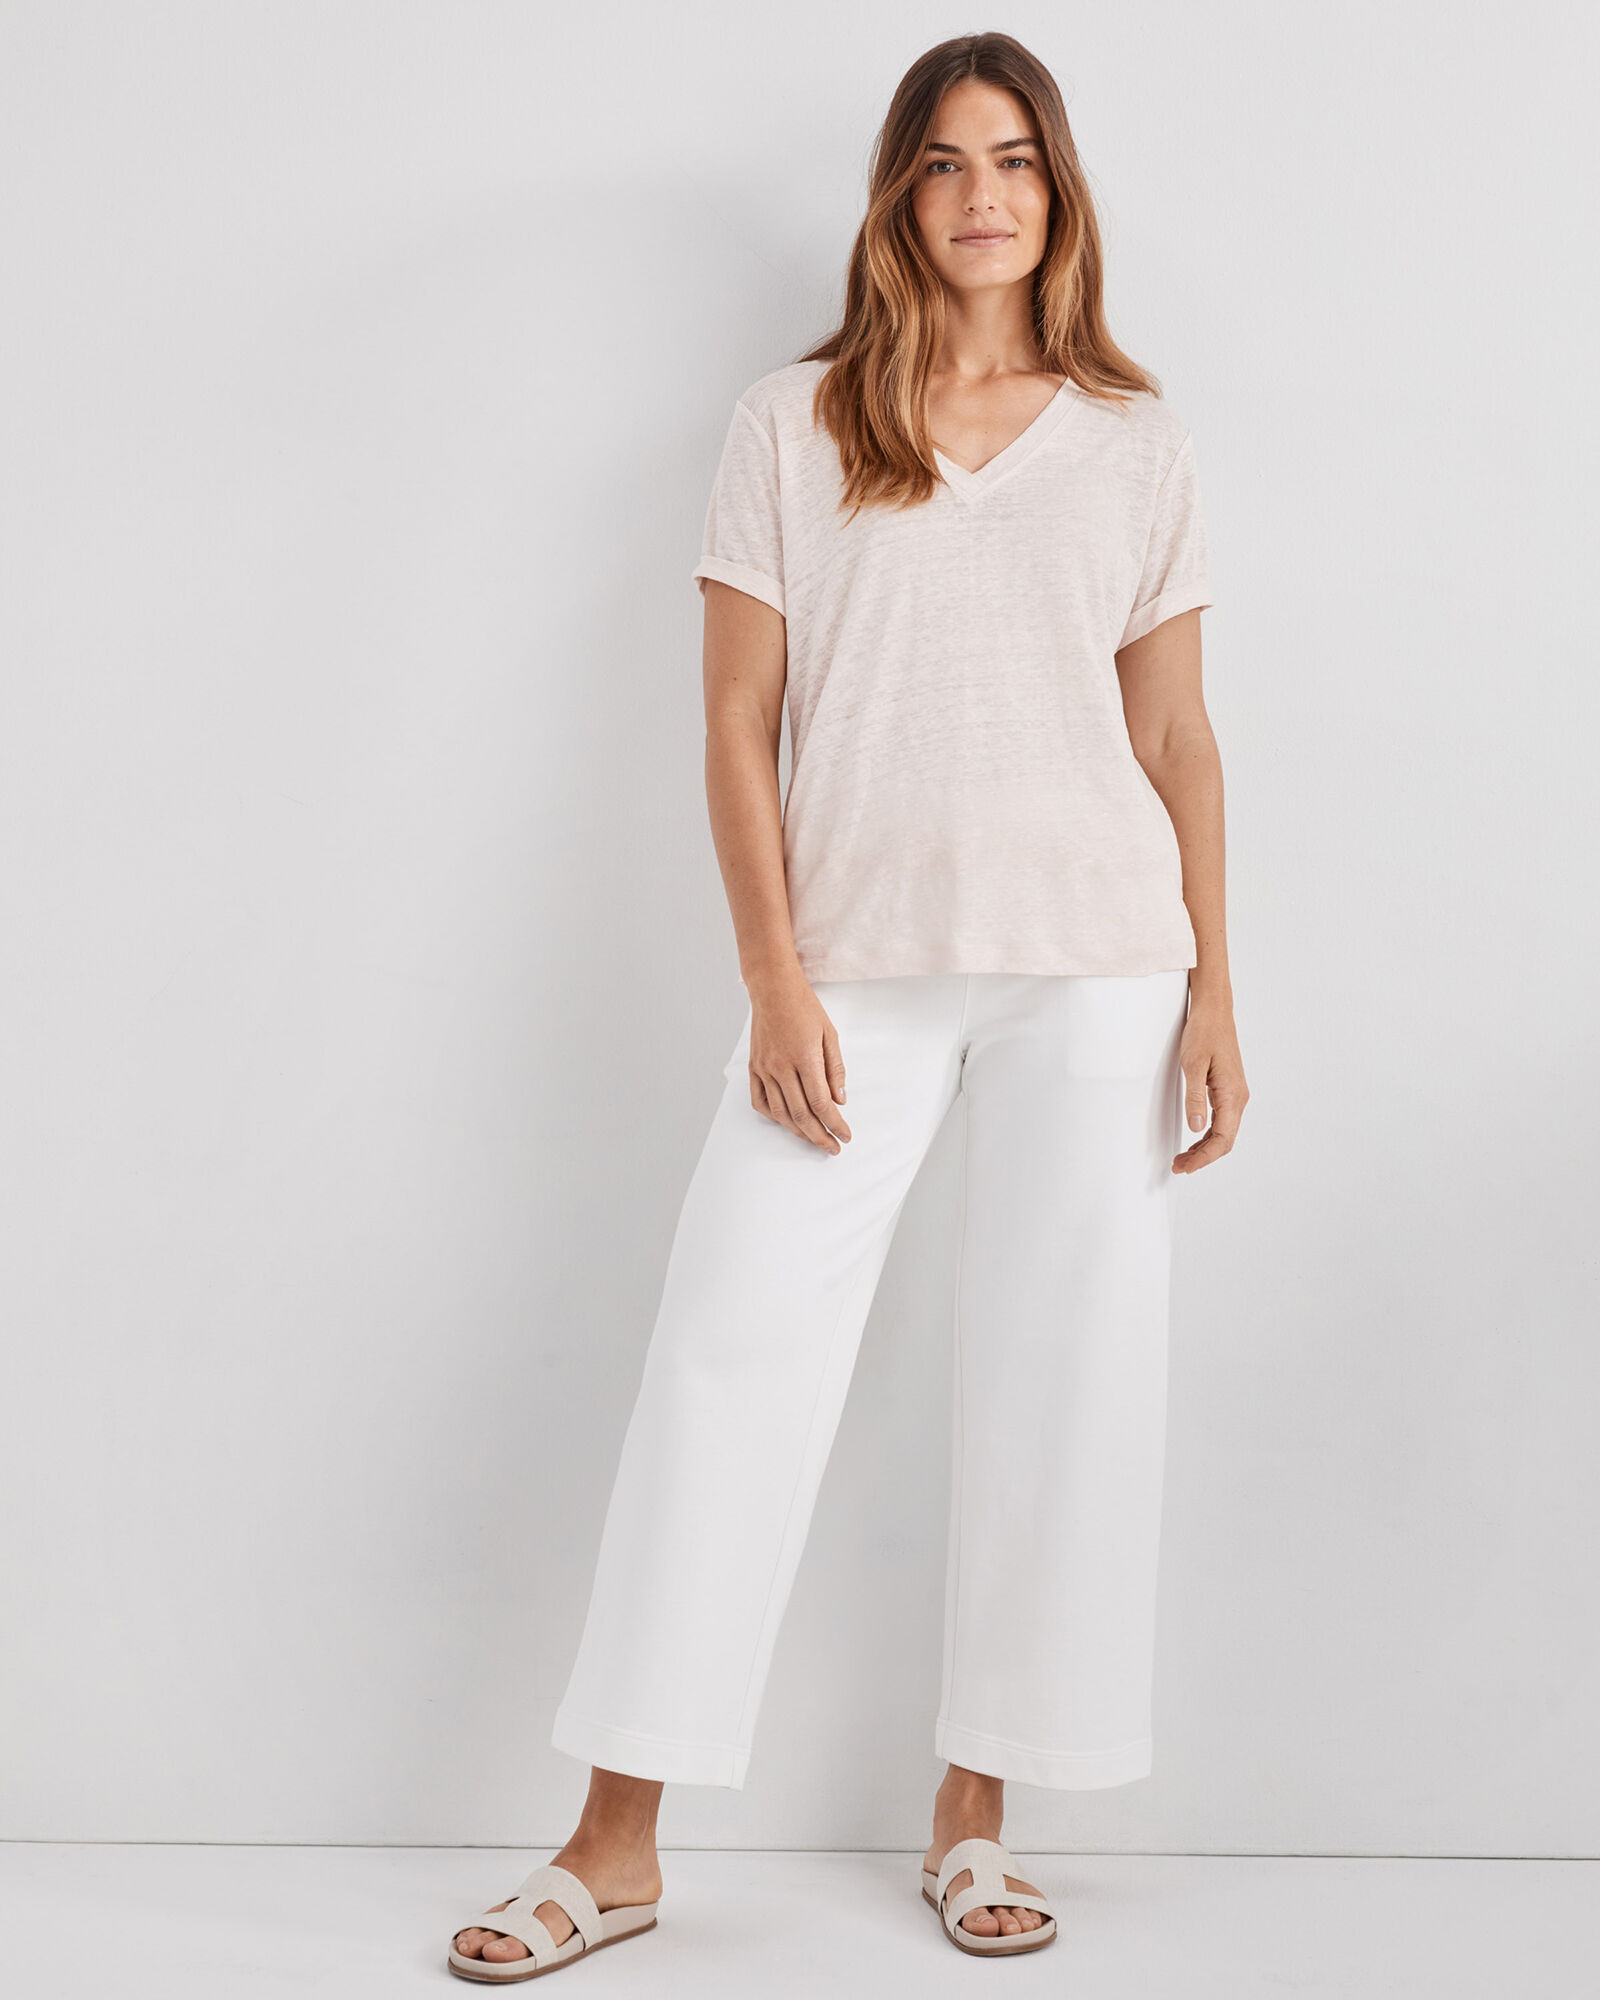 Within Well | V-Neck Linen Tee Jersey Haven